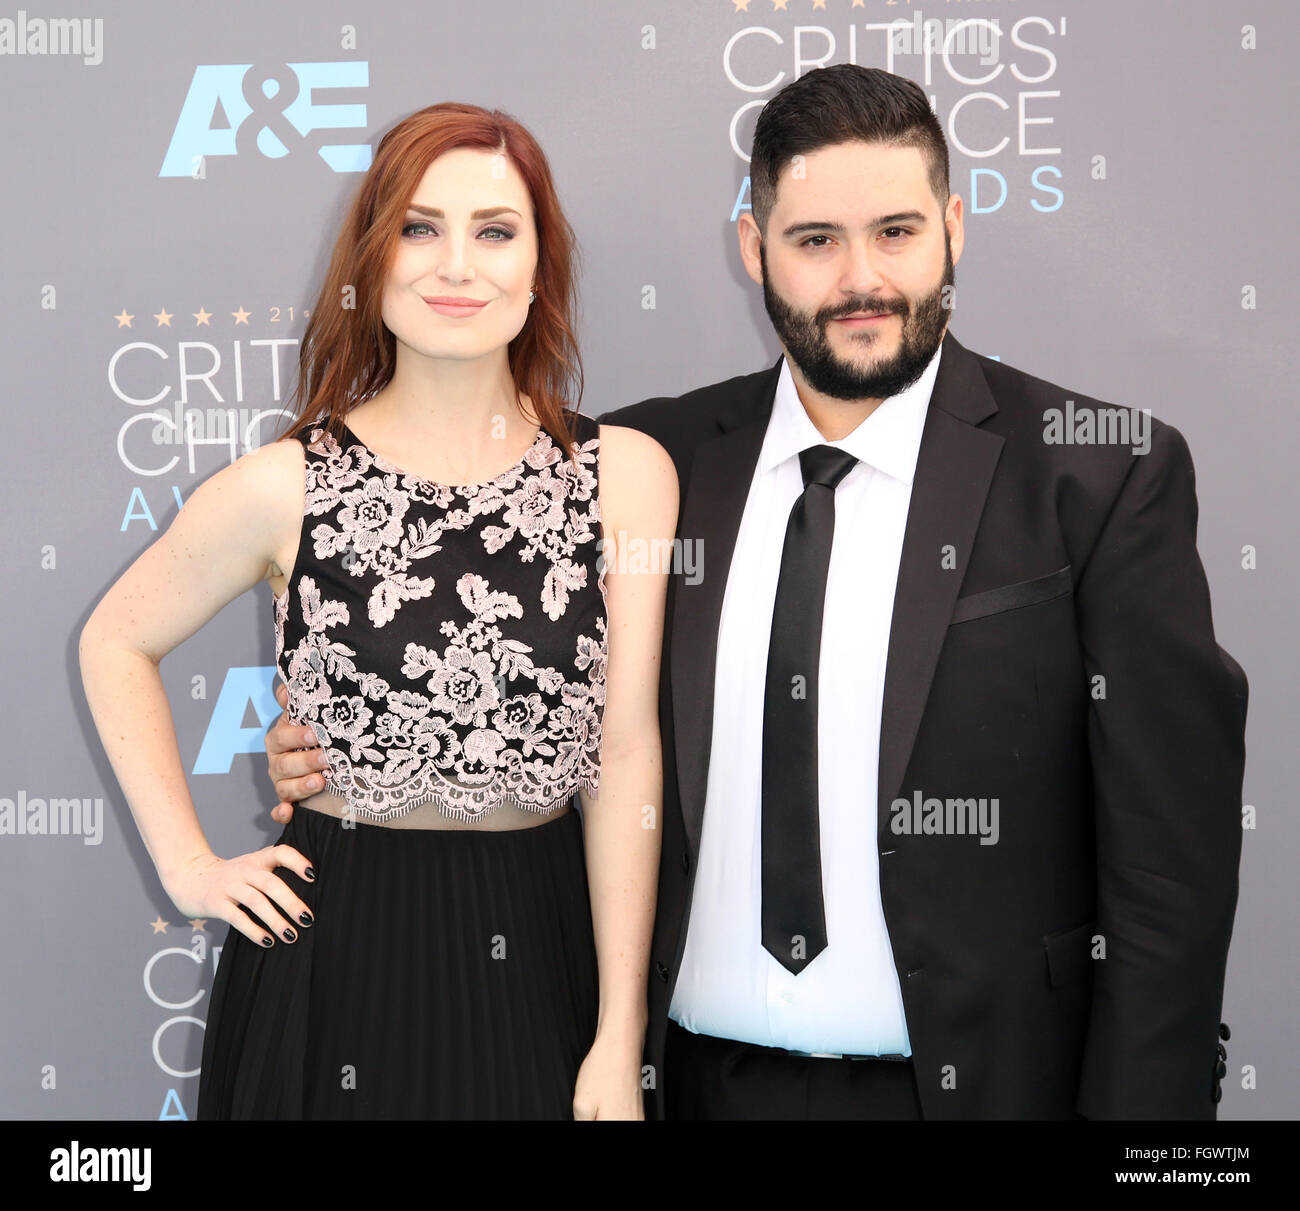 Celebrities attend The 21st Annual Critics' Choice Awards at Barker Hangar.  Featuring: Bree Essrig, Steve Zaragoza Where: Los Angeles, California,  United States When: 17 Jan 2016 Stock Photo - Alamy